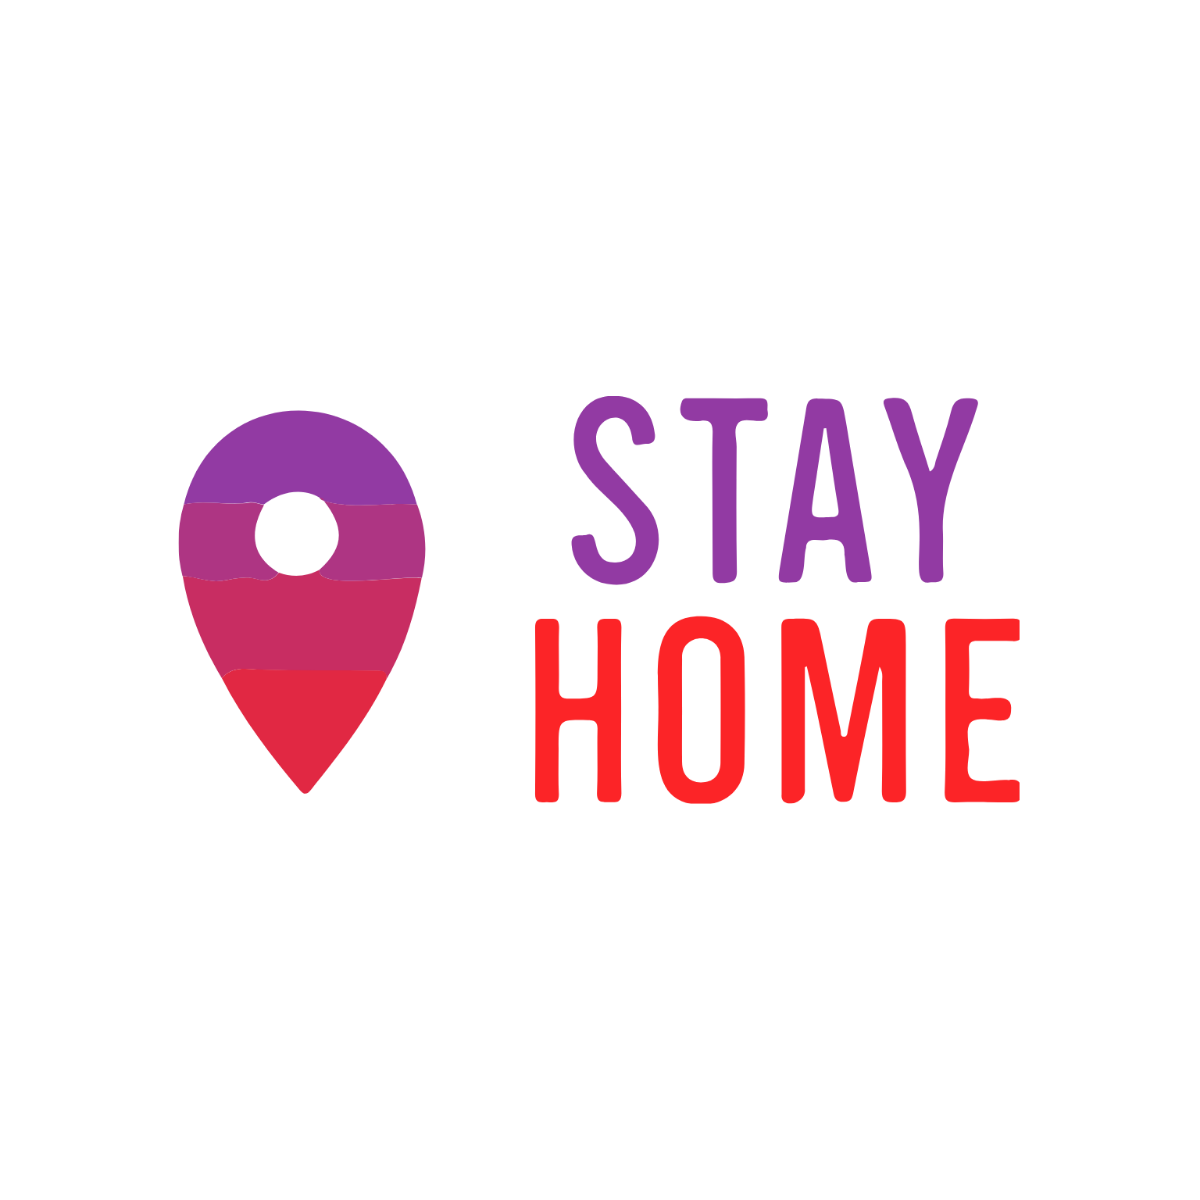 Stay Home Instagram Clipart Template